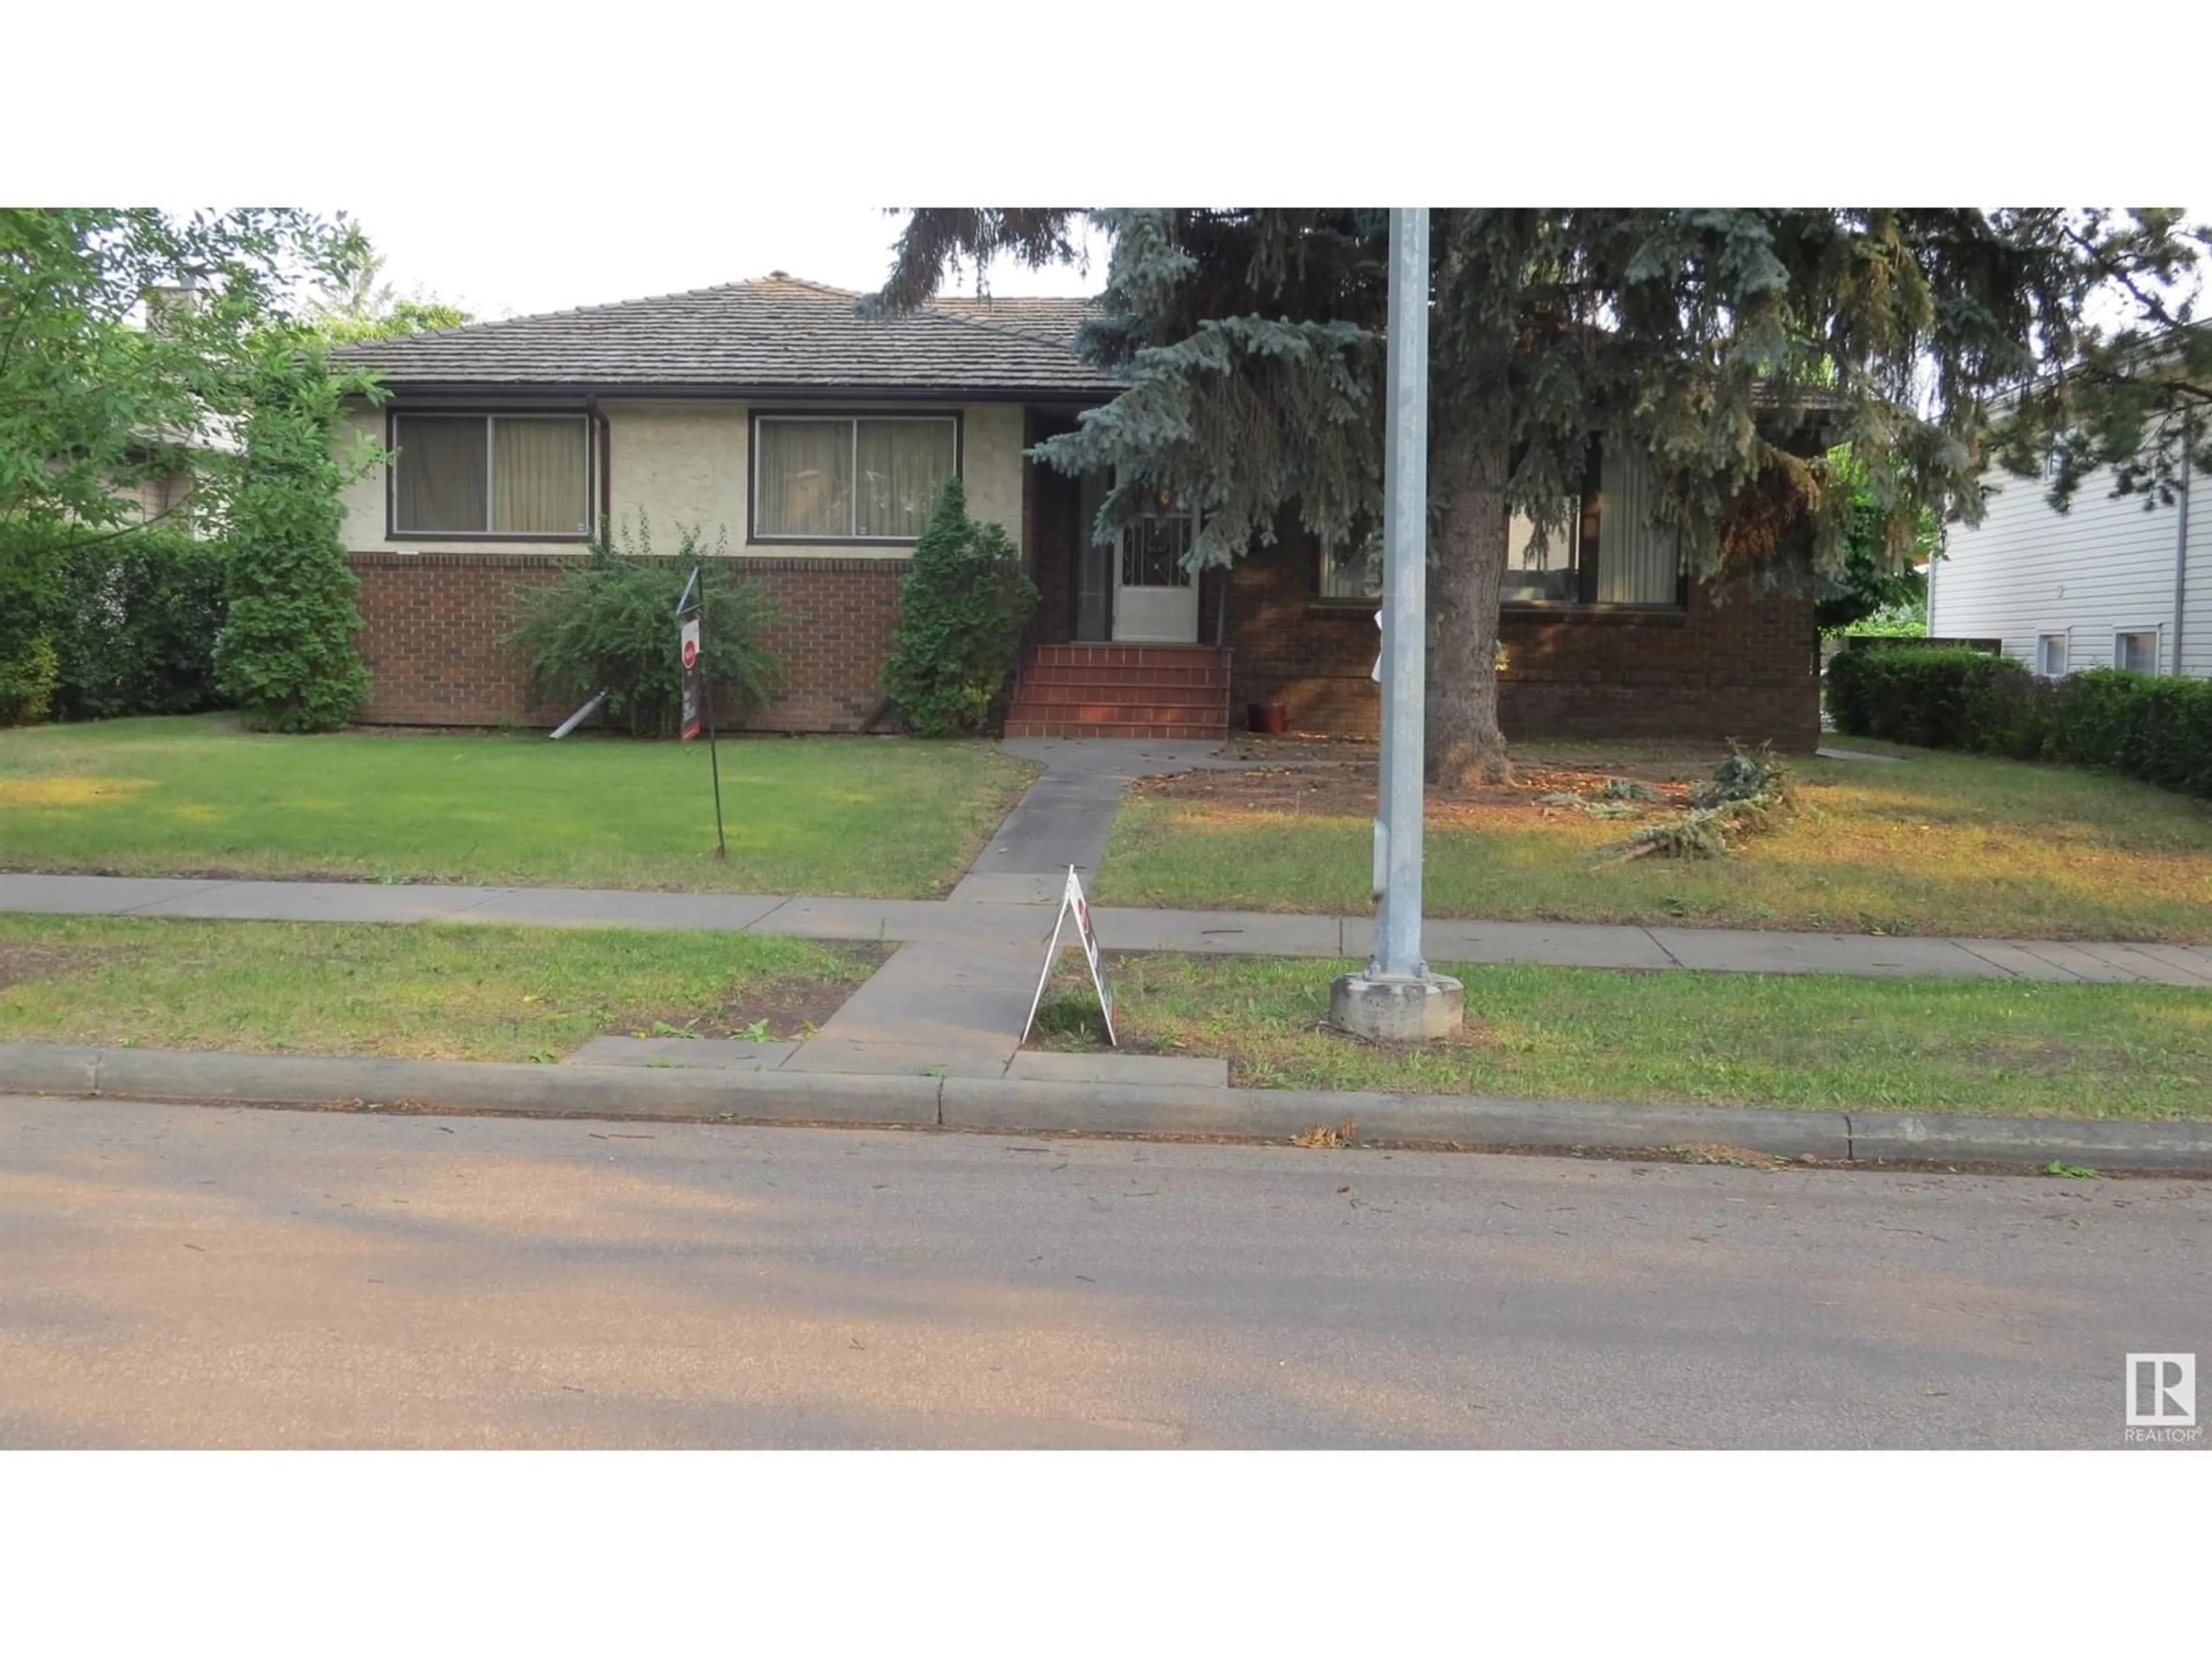 Frontside or backside of a home for 9547 81 ST NW, Edmonton Alberta T6C2W4